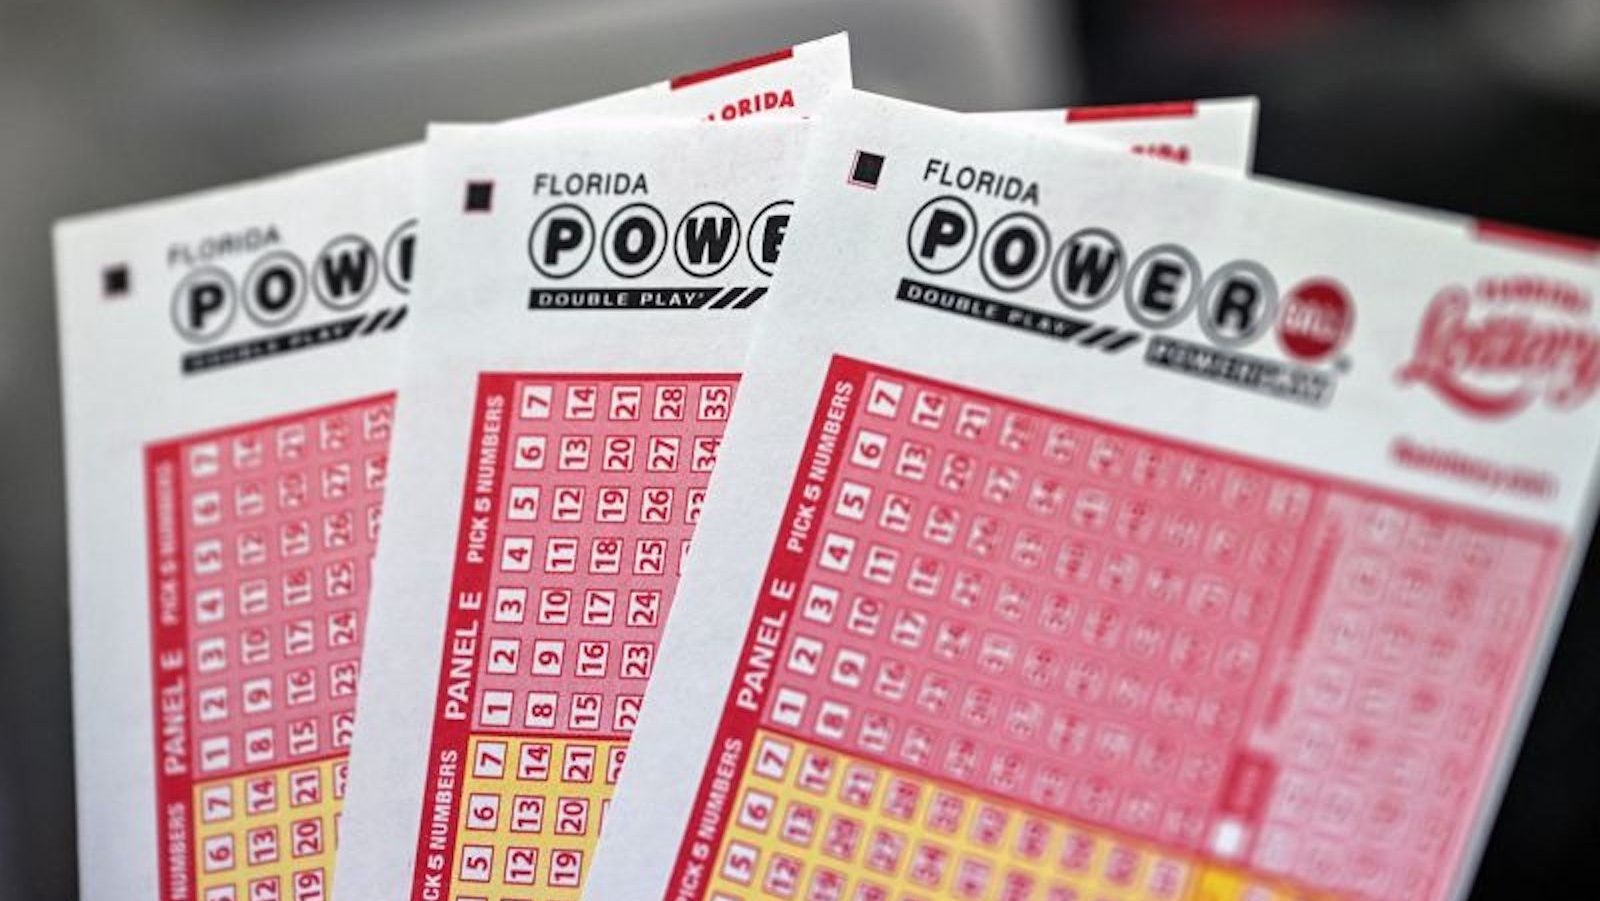 The Powerball jackpot is worth $785 million, the fourth largest in the history of this lottery